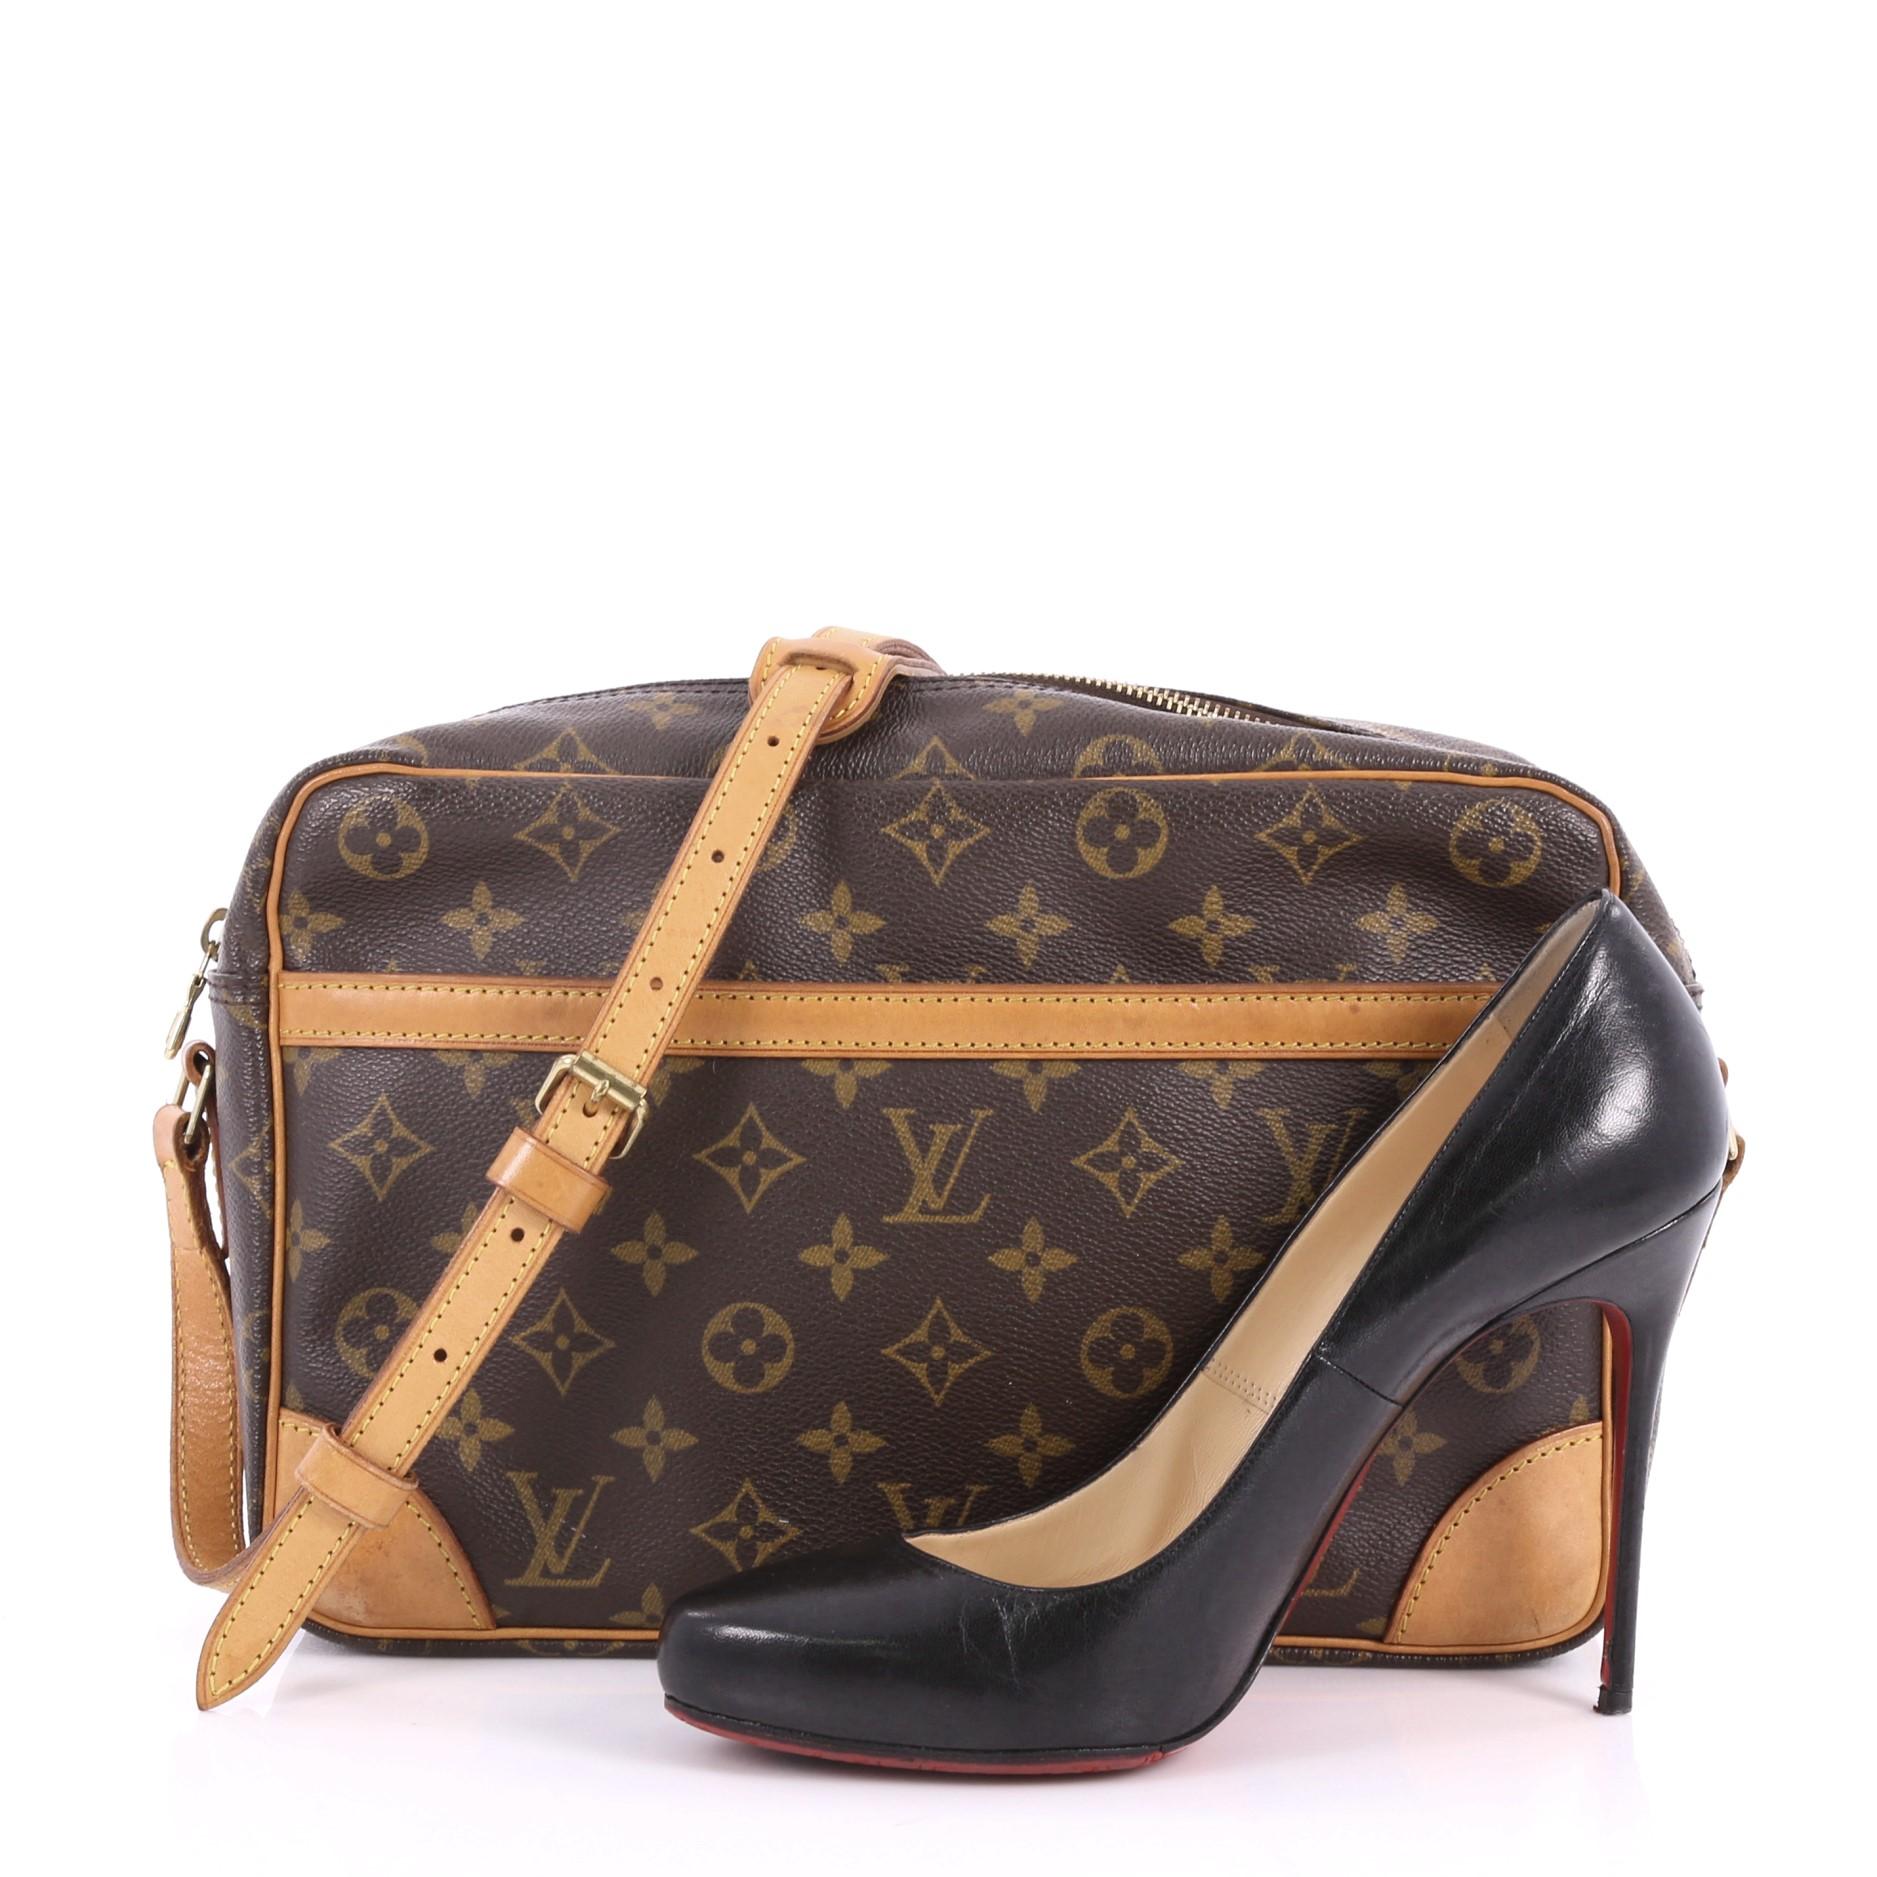 This authentic Louis Vuitton Trocadero Handbag Monogram Canvas 30 is perfect for everyday wear and big enough to hold all your daily essentials. Crafted from brown monogram coated canvas, this bag features adjustable long natural cowhide shoulder